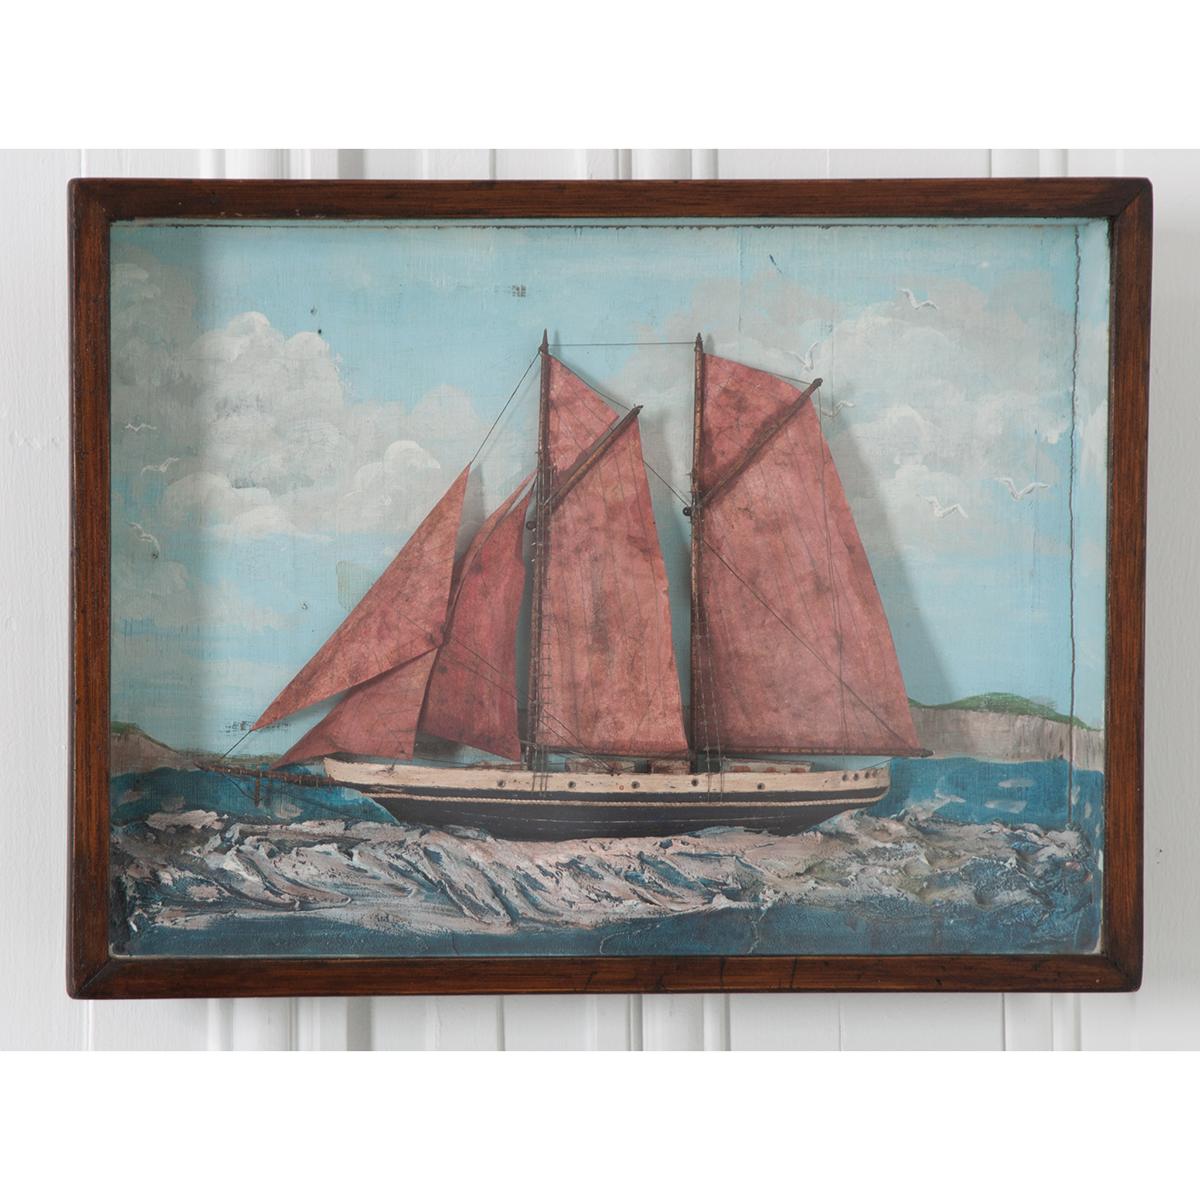 A brilliant English 19th century nautically themed diorama featuring a schooner with red sails. These three dimensional works of art were typically made by sailors in the 19th century.This diorama depicts a schooner at sea, but near the coast. Note